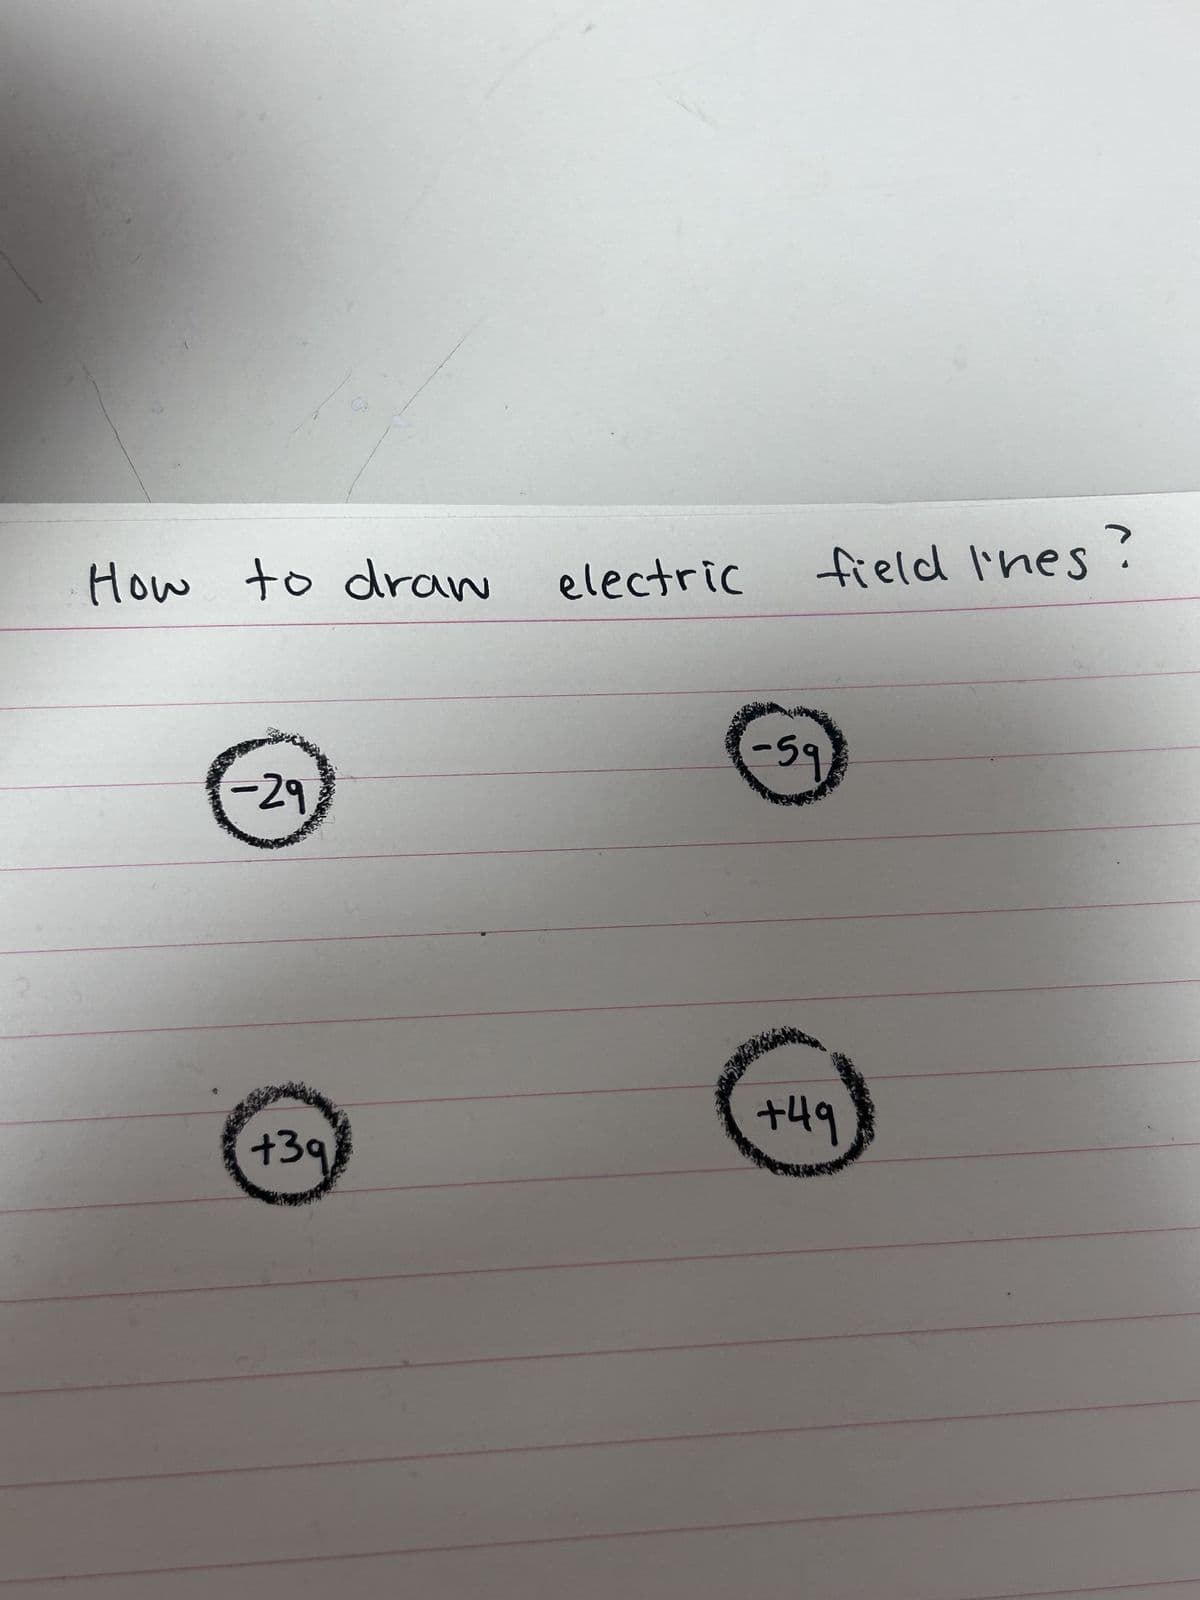 How to draw
-29
+39
electric
field lines?
-59
+49